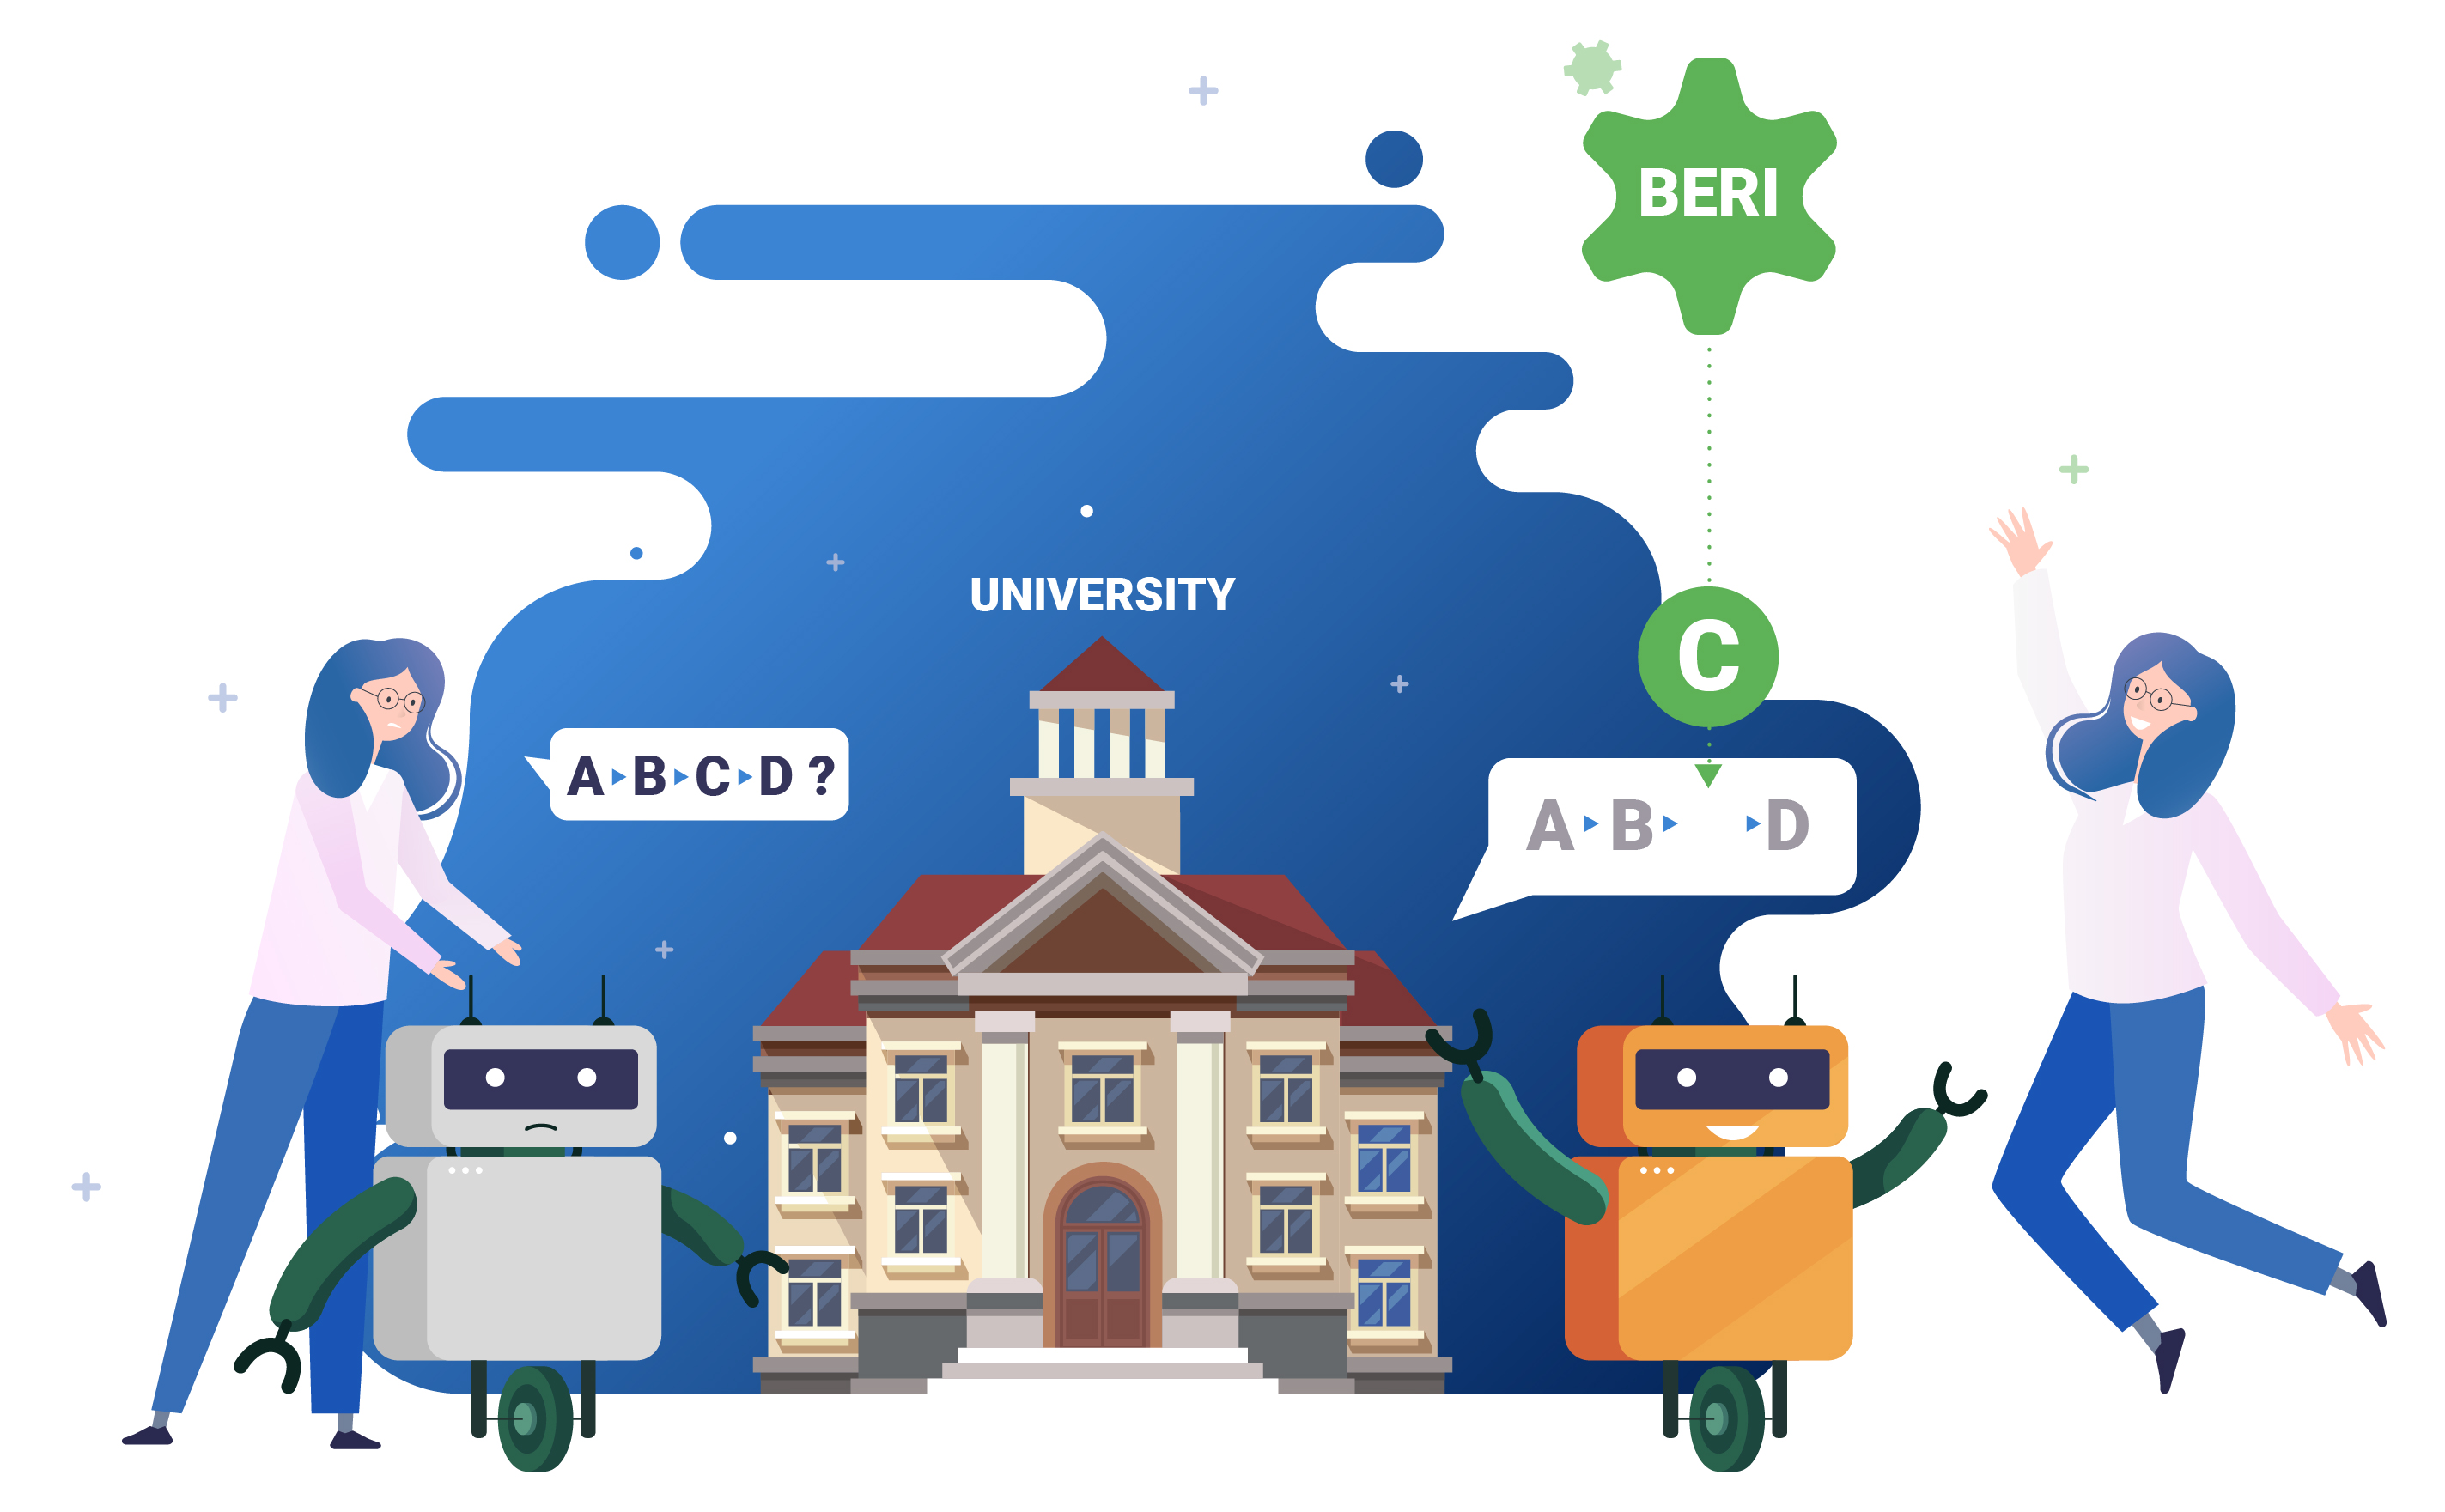 BERI teams up with universities to make researchers' plans happen!